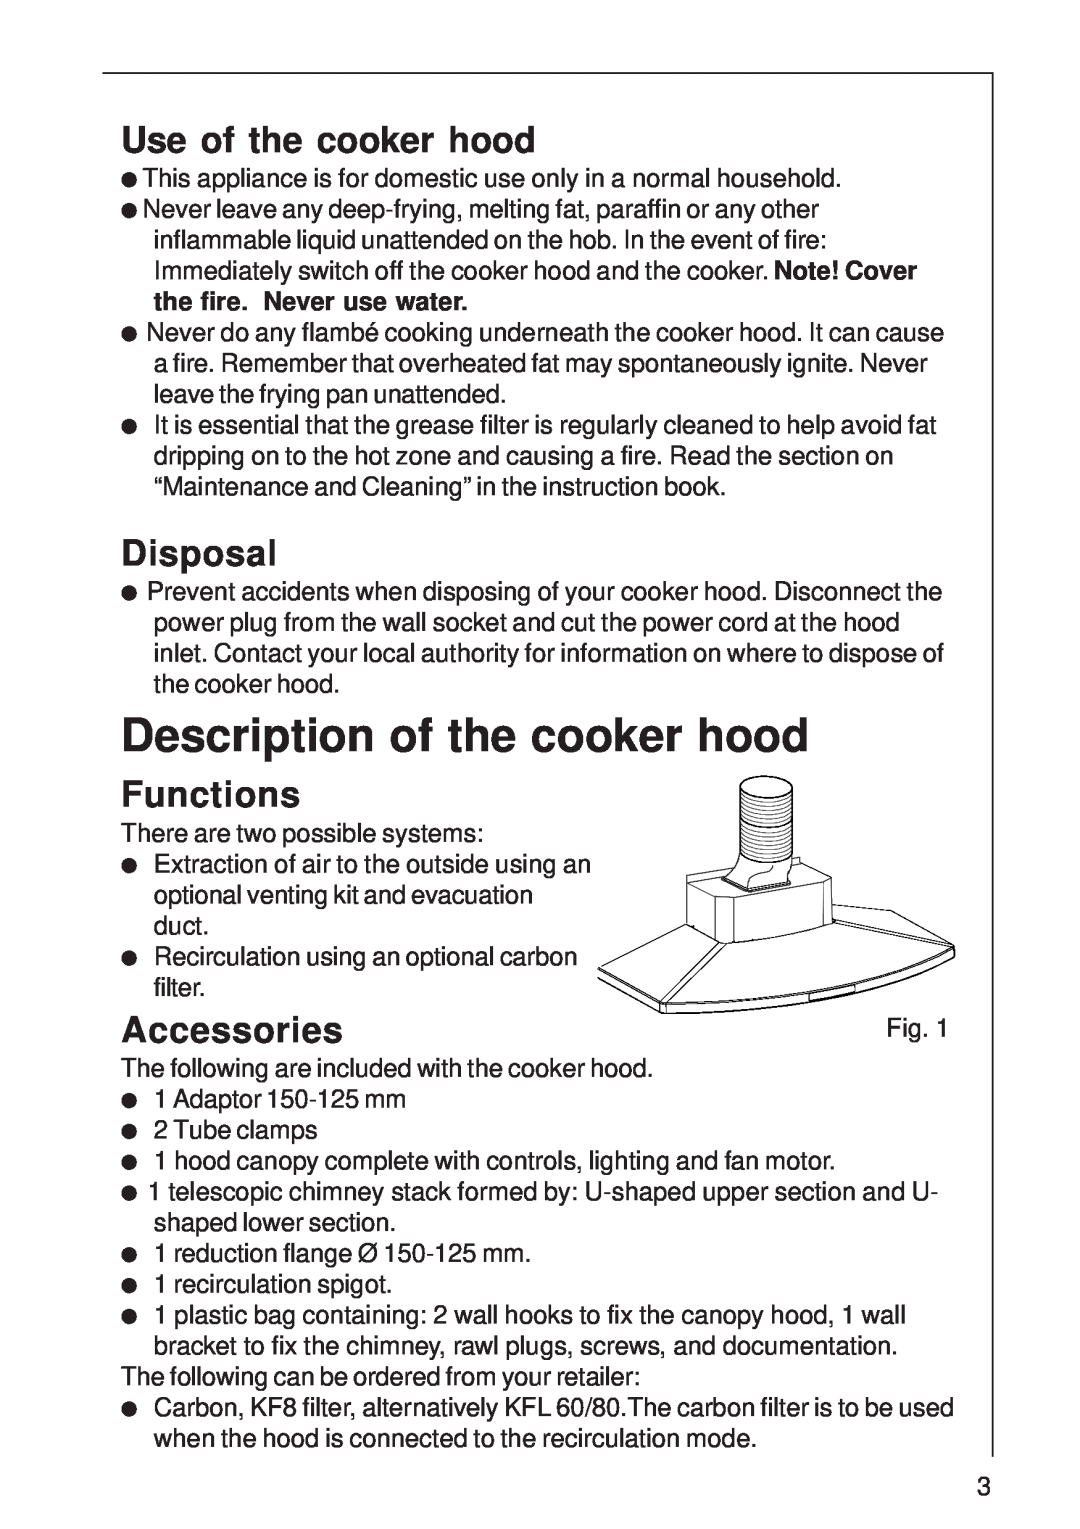 AEG 8160 D Description of the cooker hood, Use of the cooker hood, Disposal, Functions, Accessories 